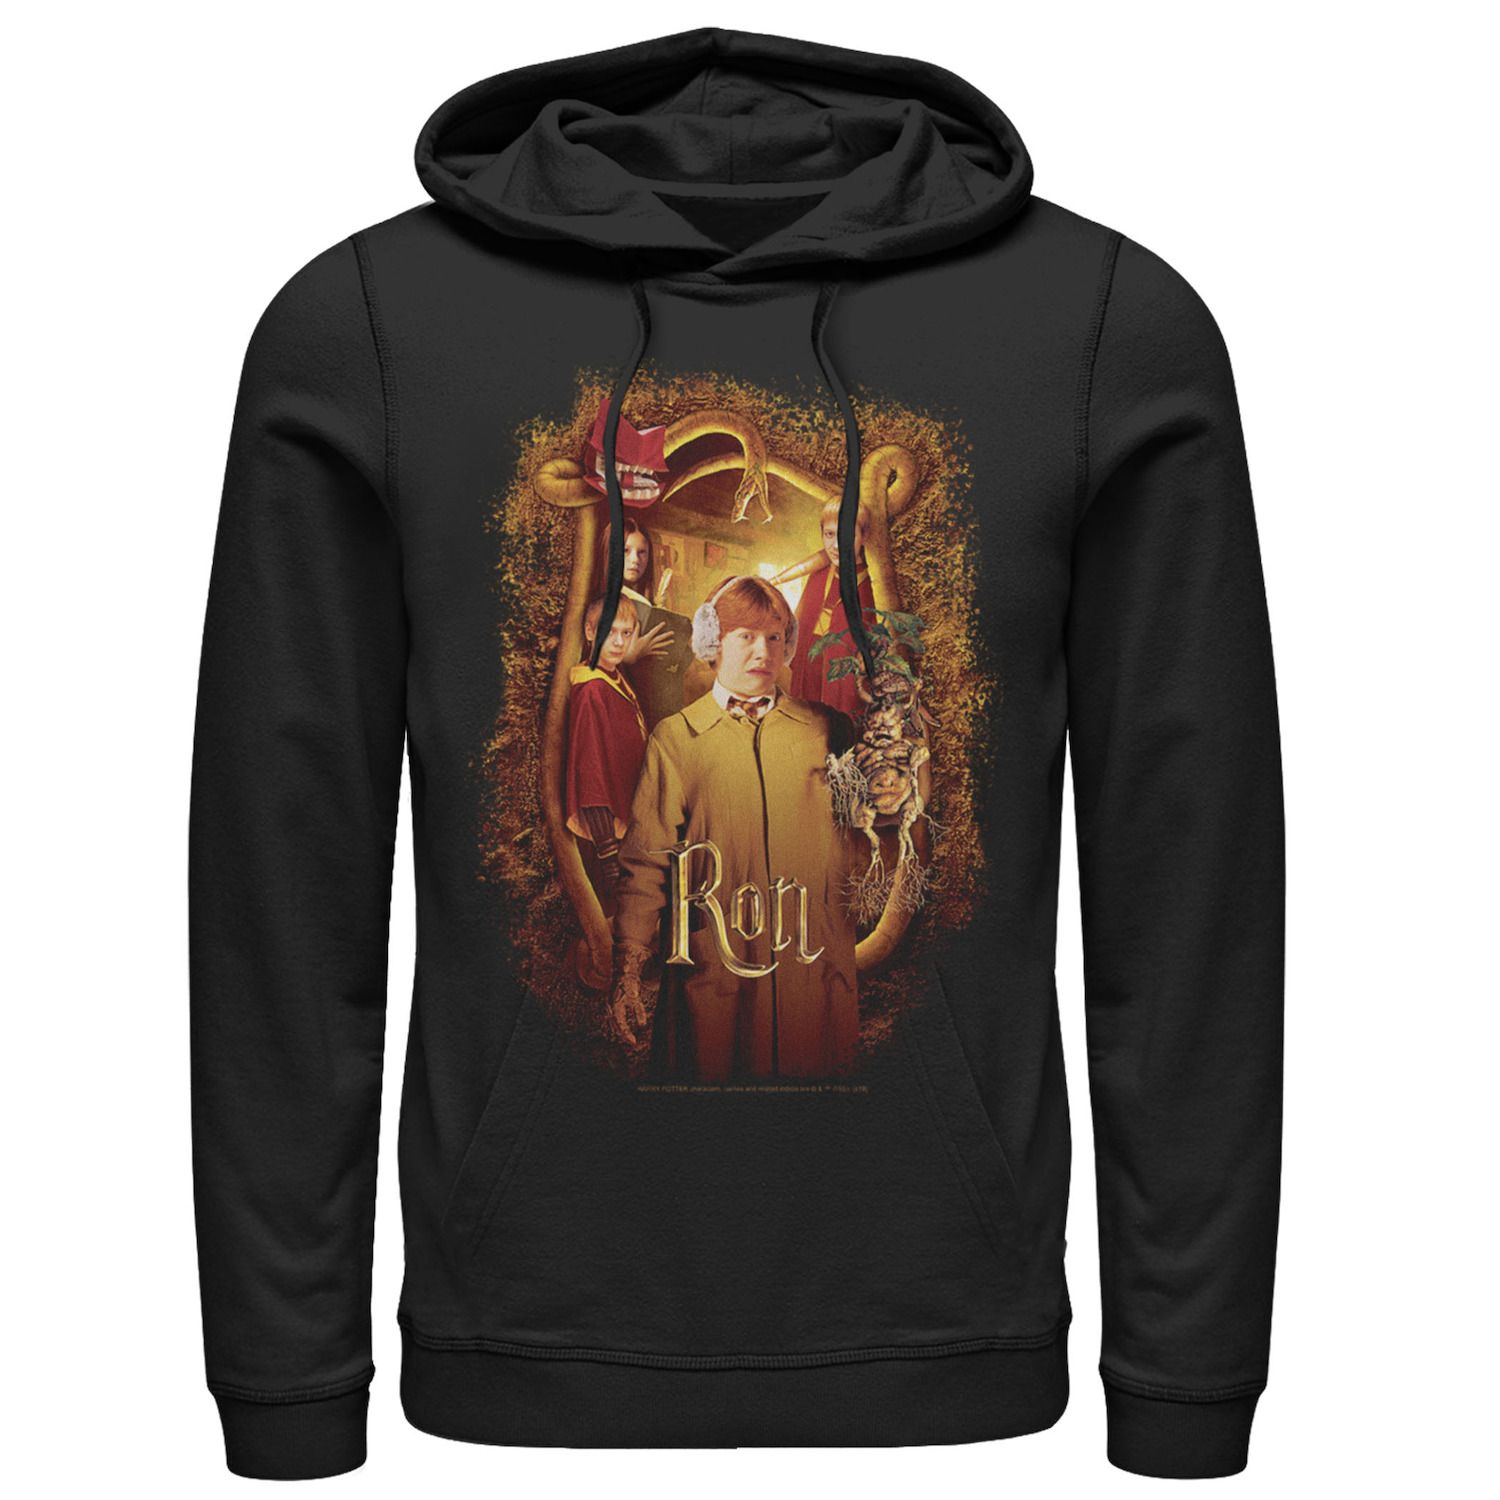 Image for Harry Potter Men's And The Chamber Of Secrets Ron Portrait Graphic Pullover Hoodie at Kohl's.